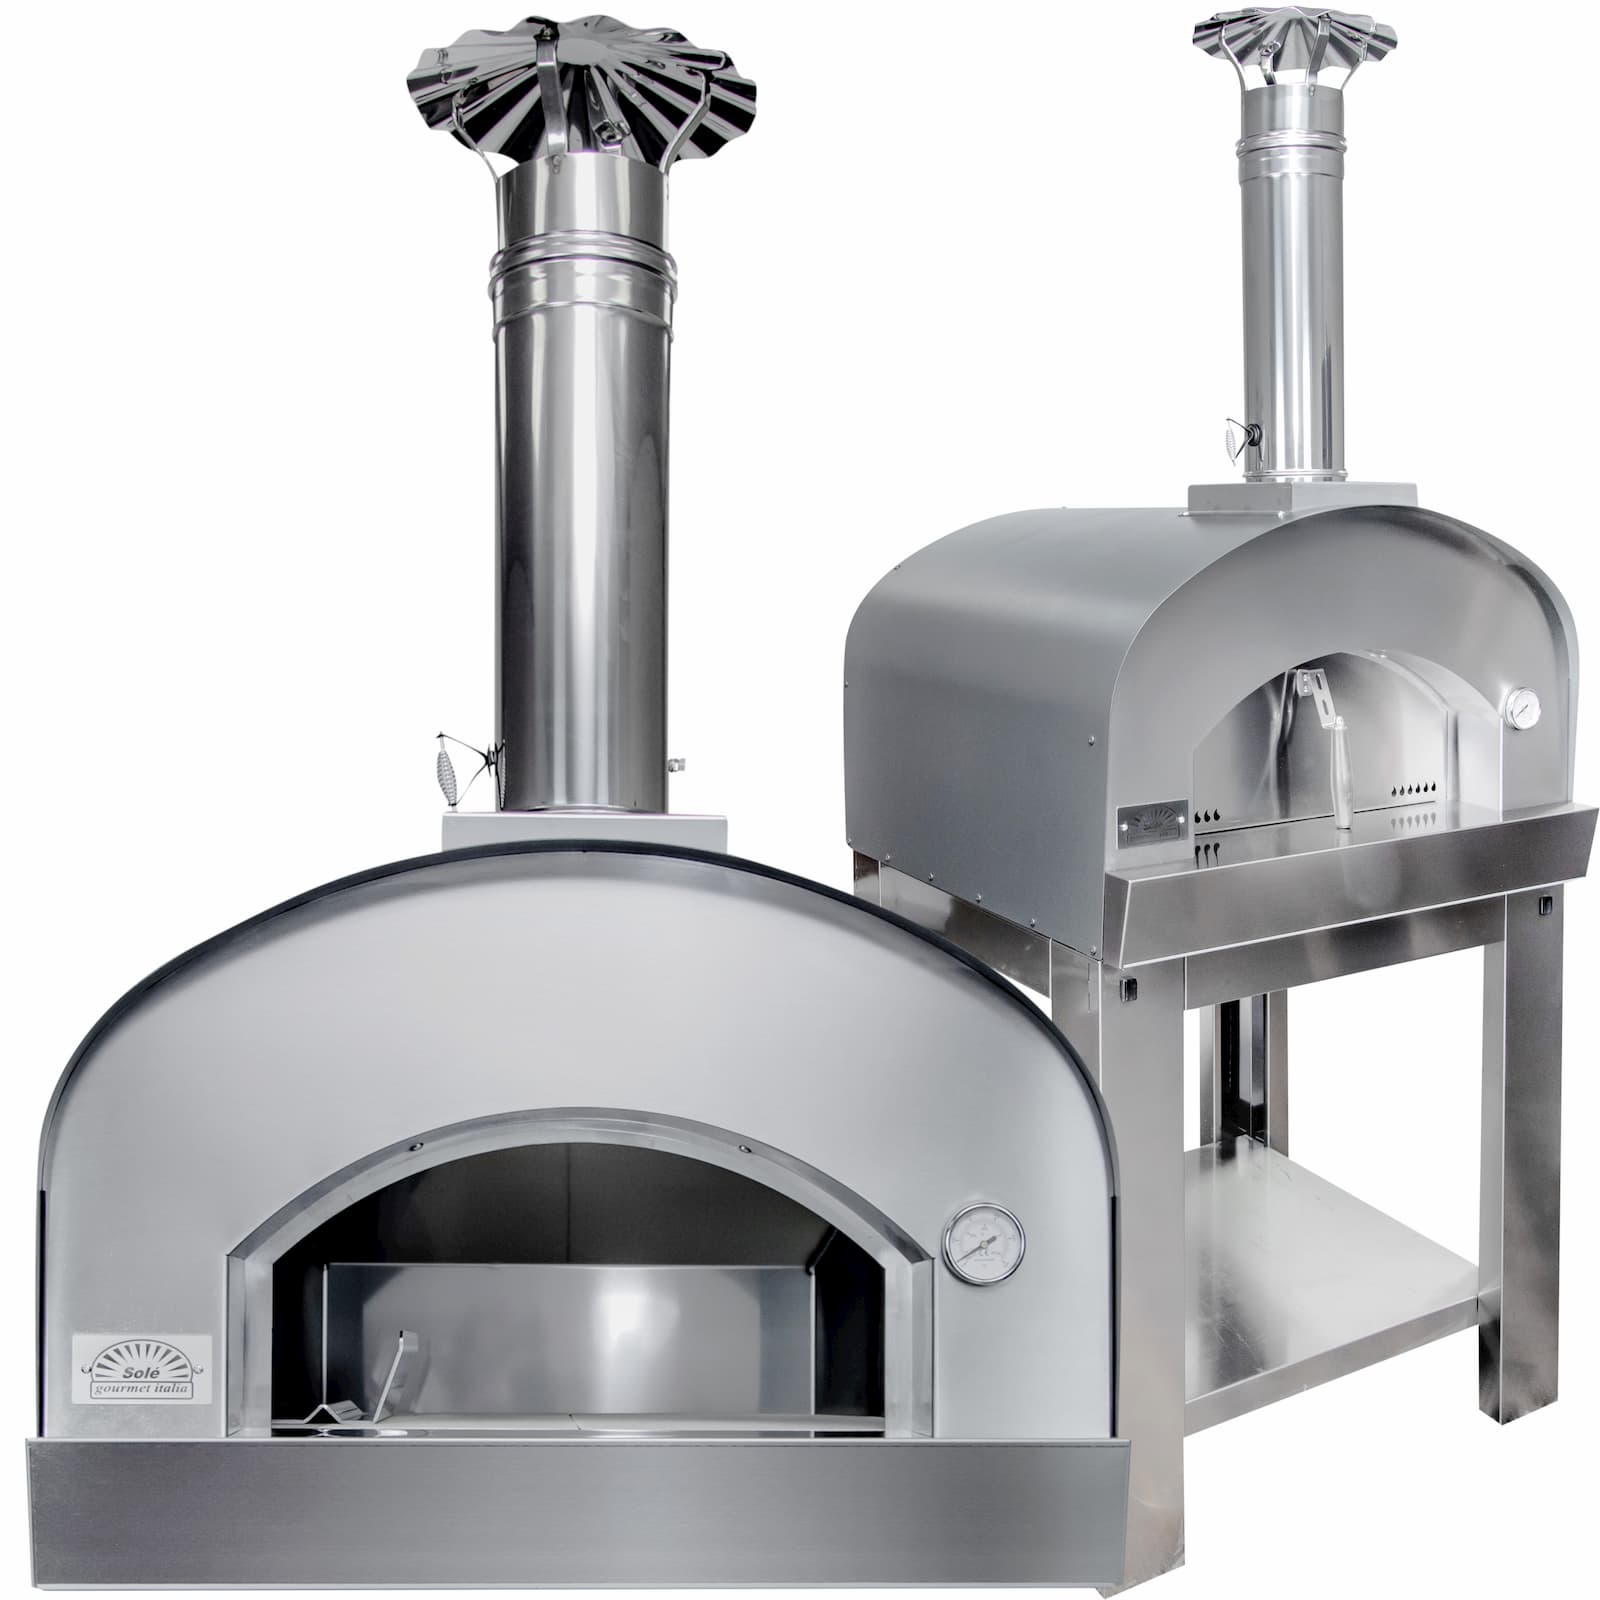 Solé Gourmet 32 Inch Italia Wood Fired Oven with Cart